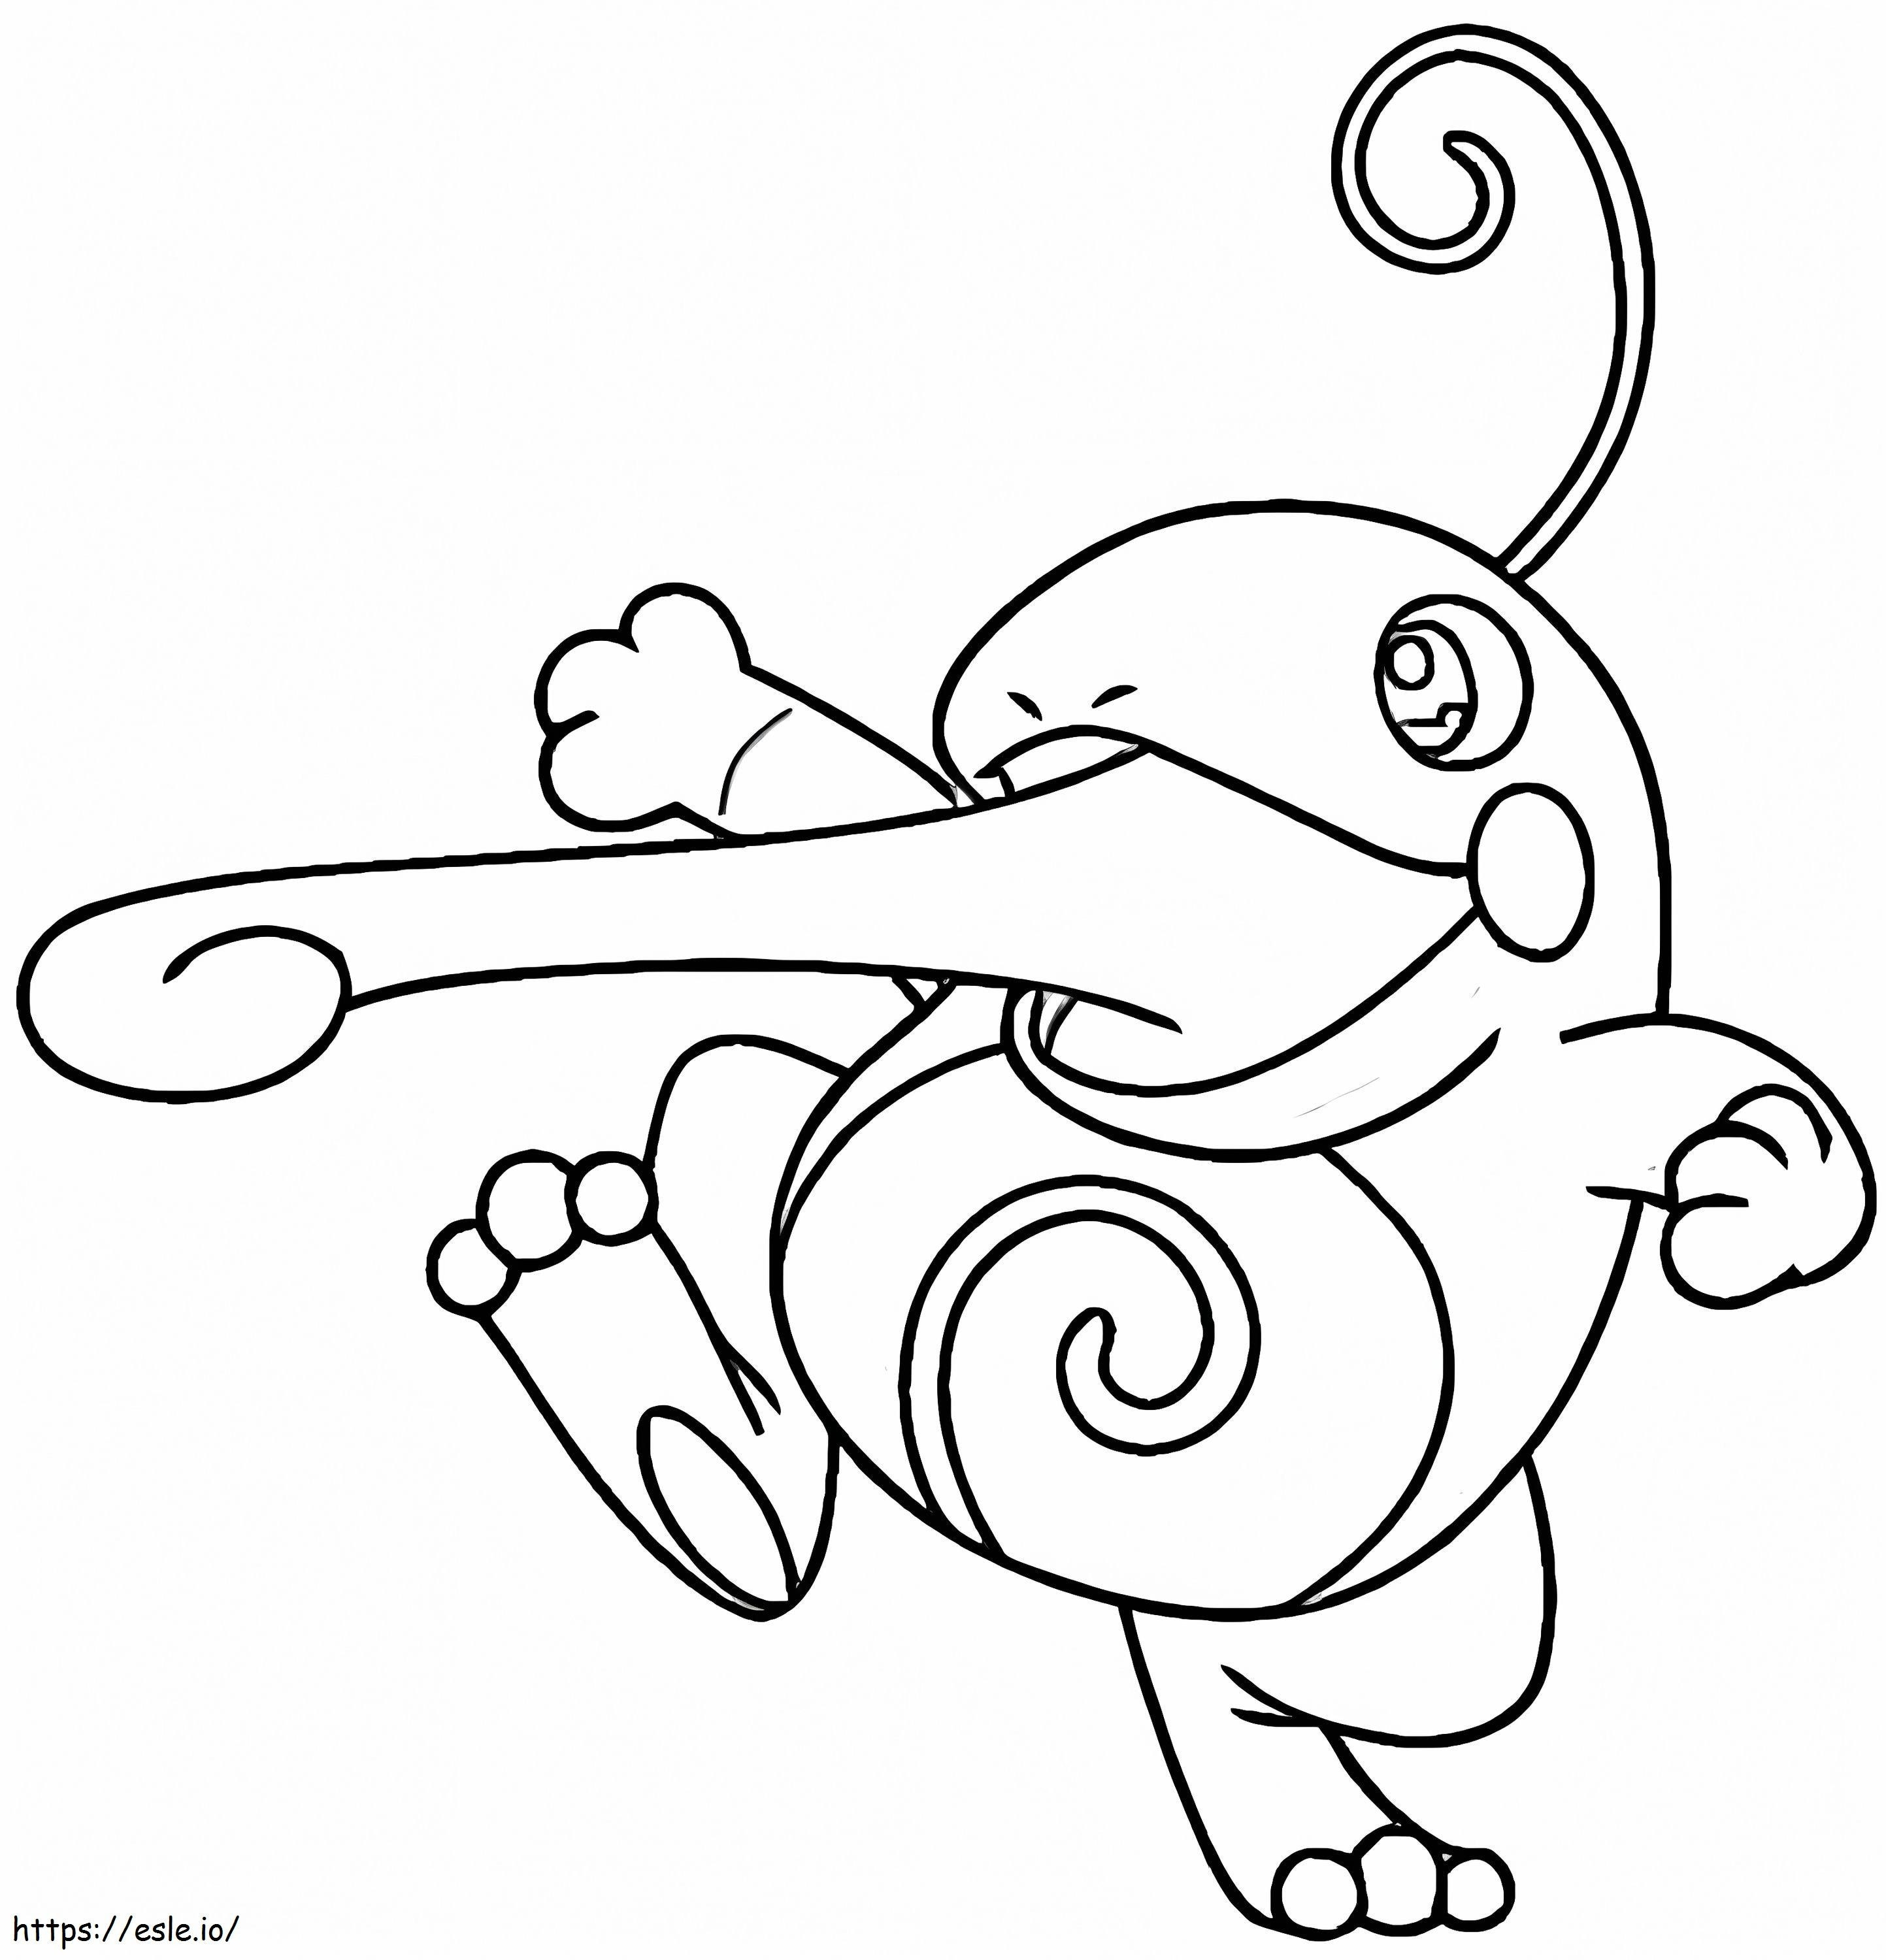 Funny Politoed Pokemon coloring page